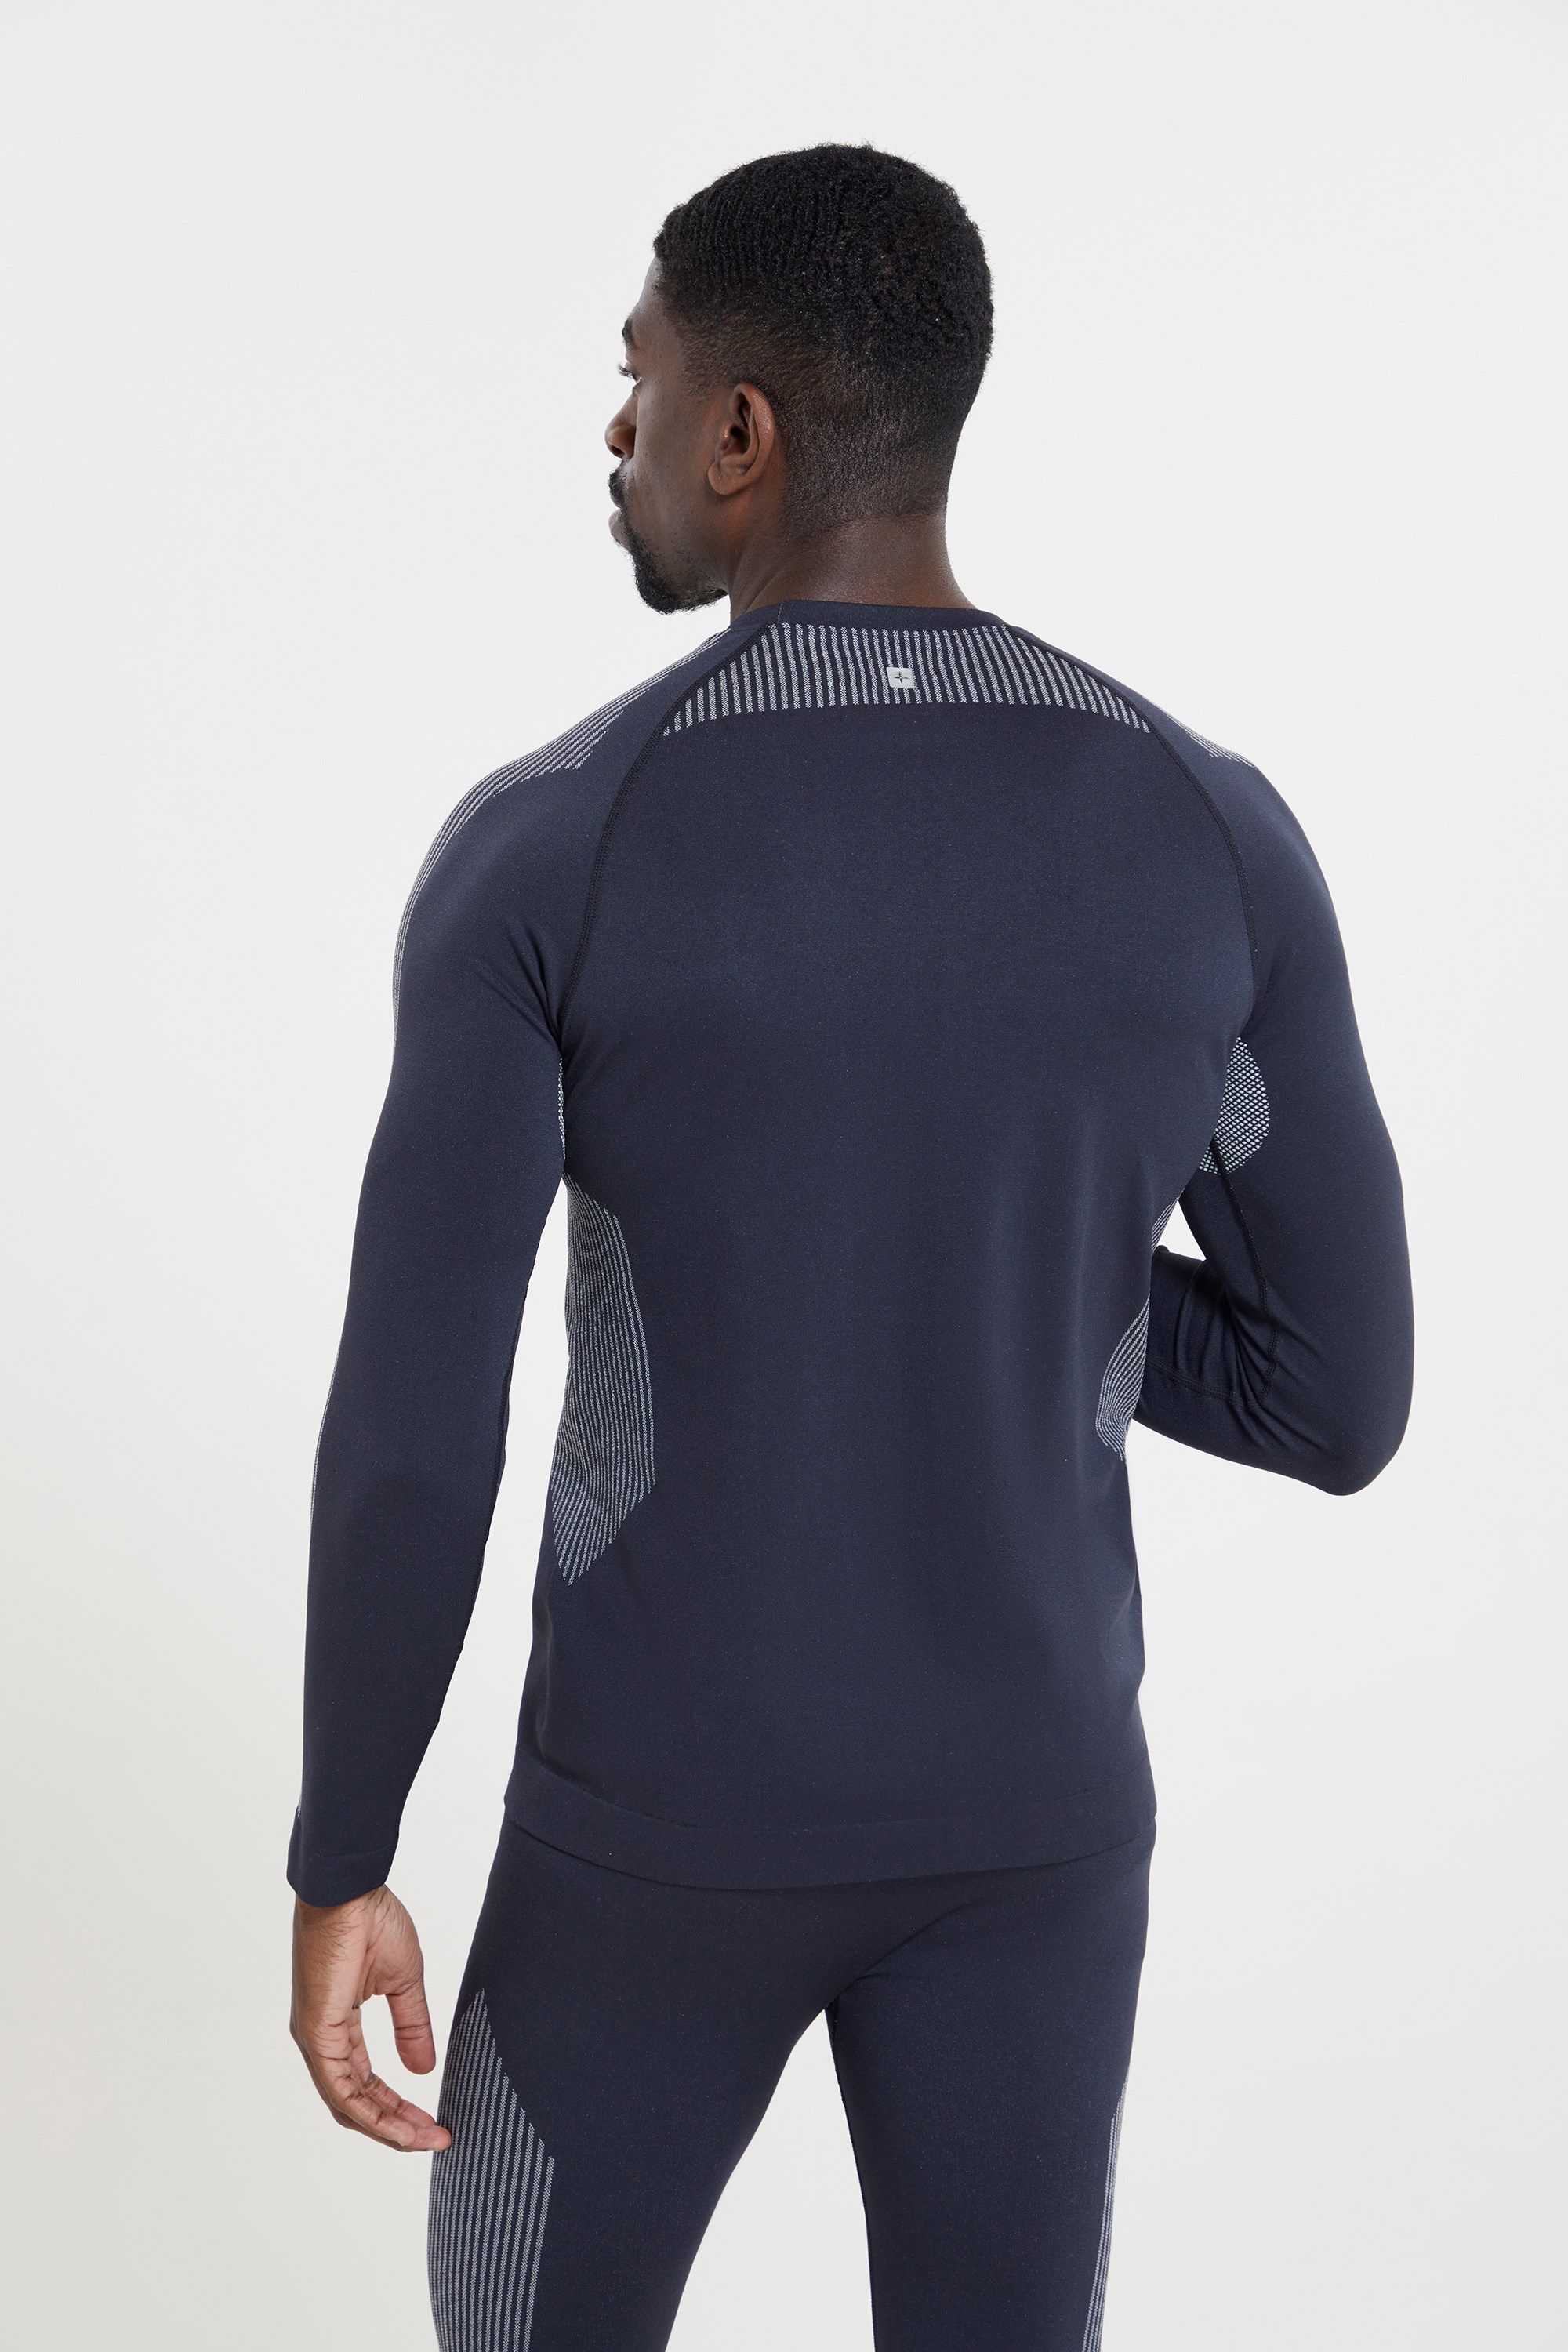 Craft Sportswear Men's Active Intensity CN LS, Crew Neck Long Sleeve  Baselayer Top for Winter Running, Cycling, Skiing